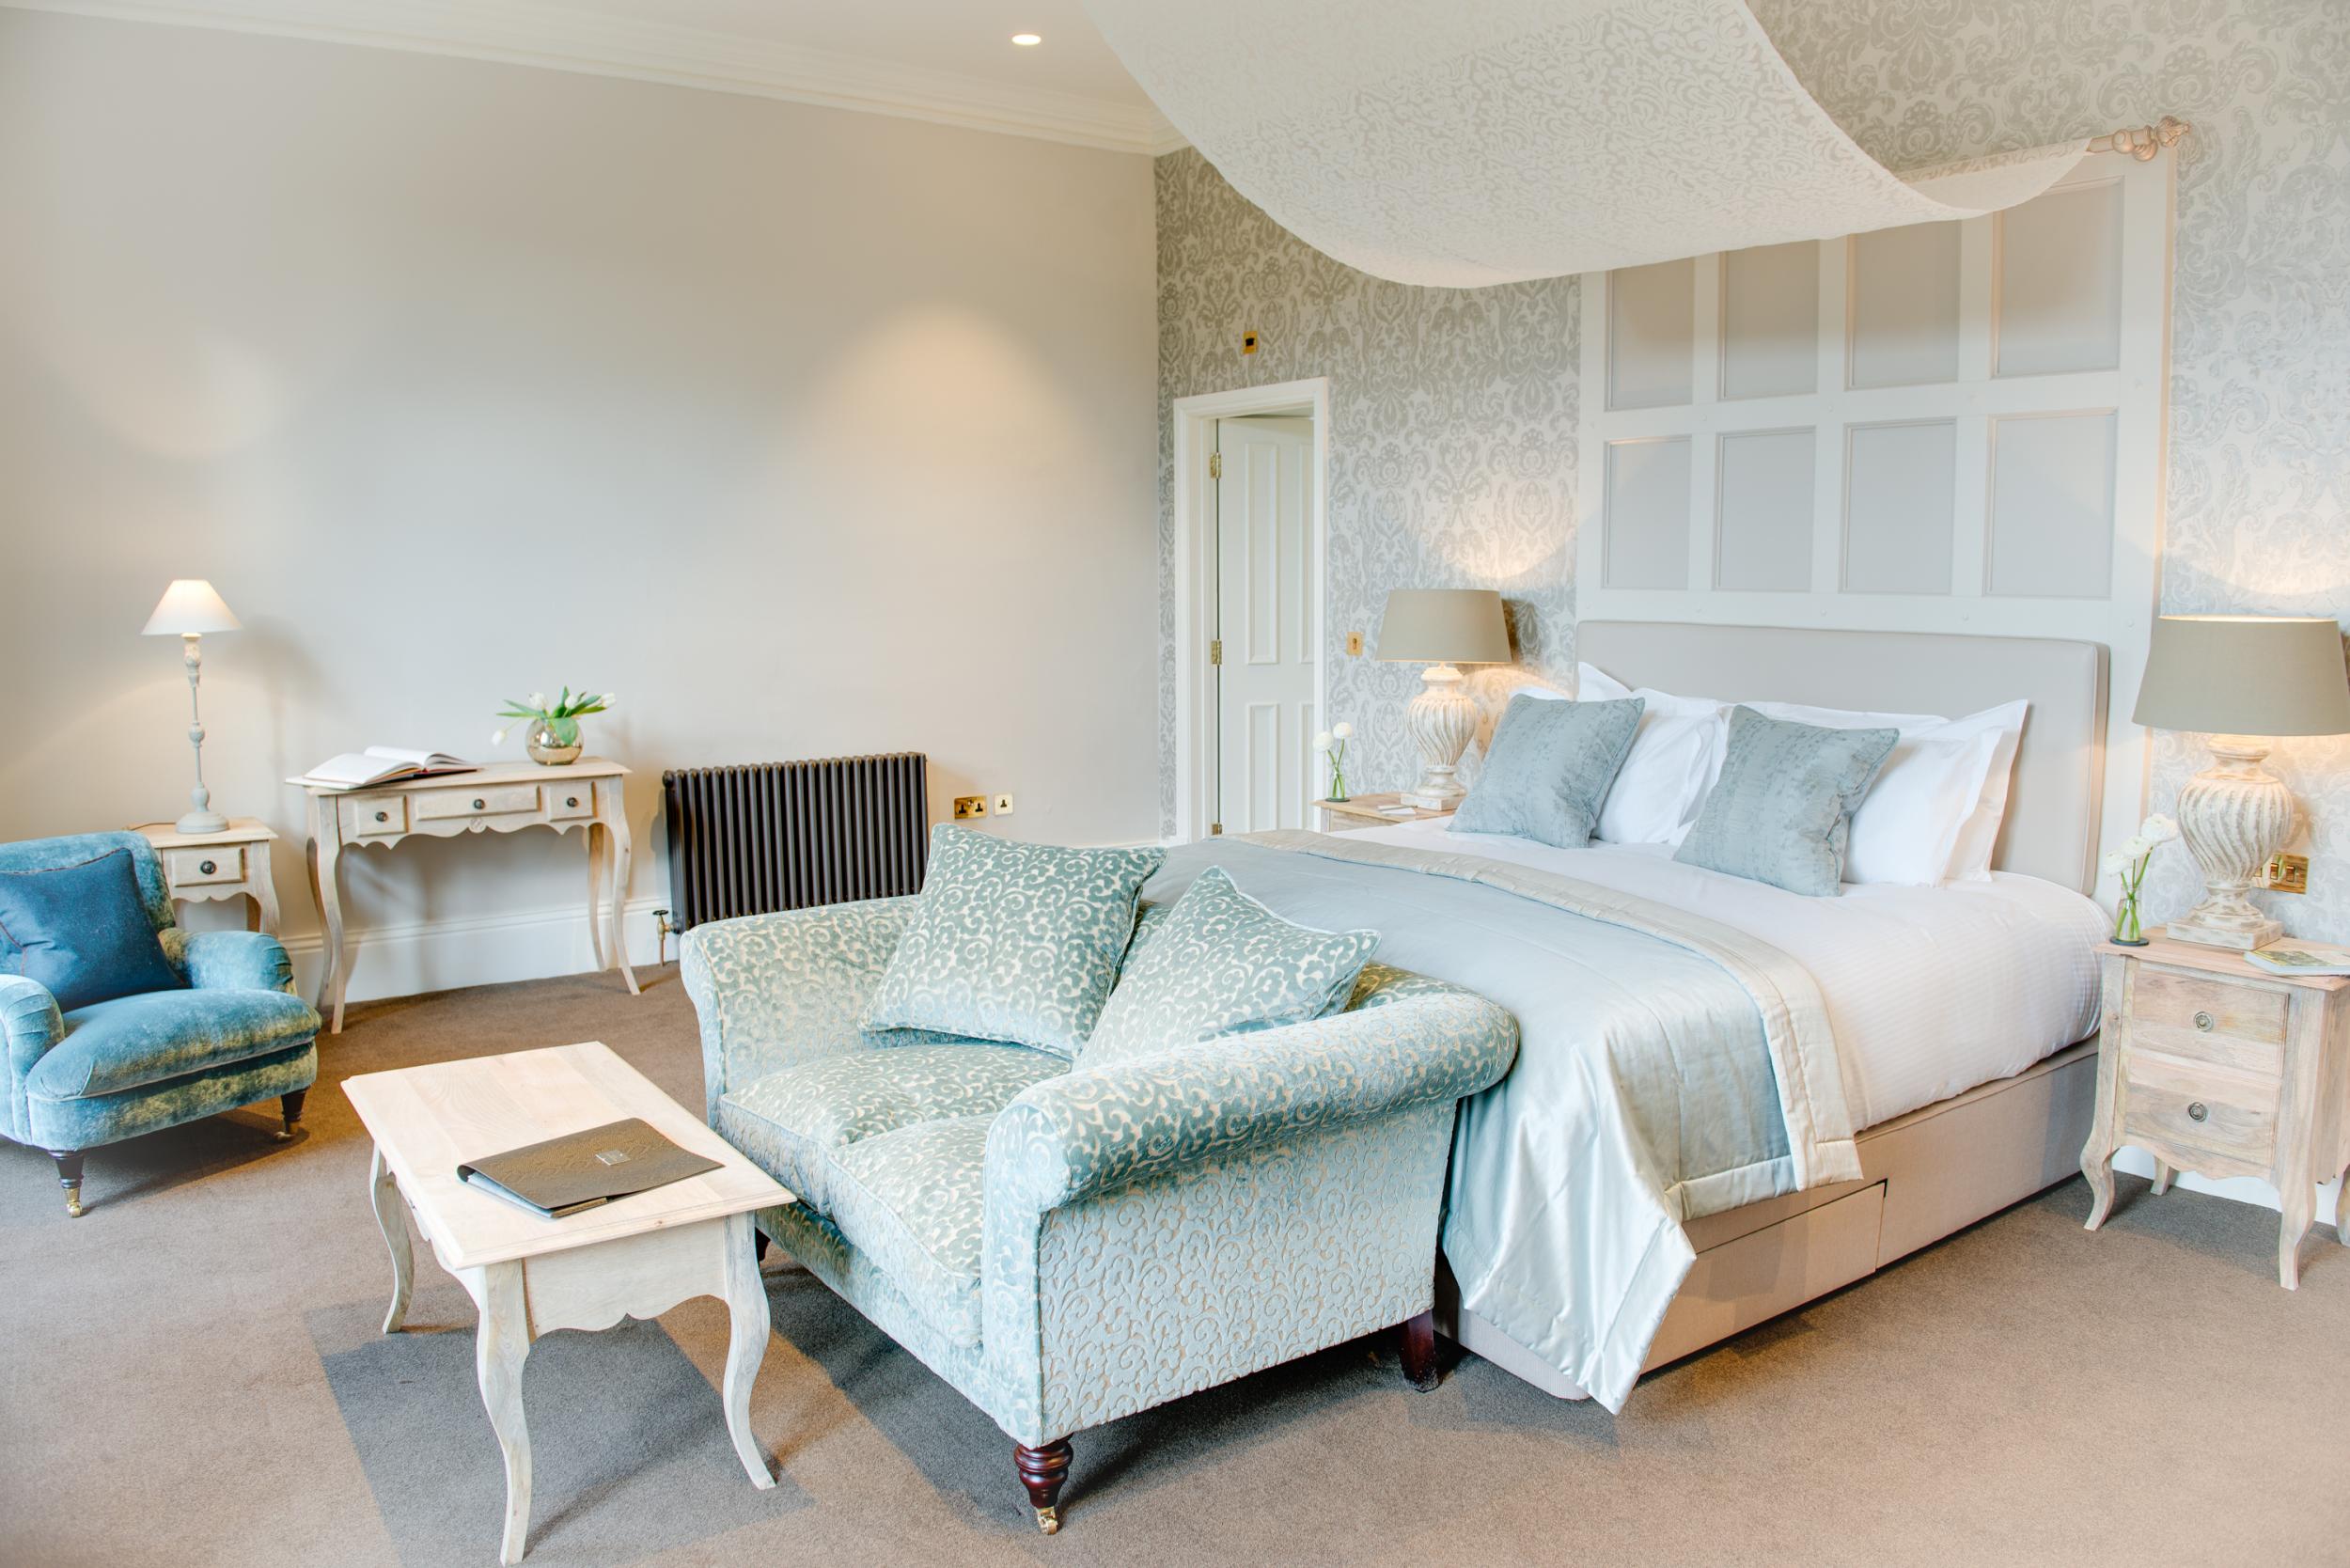 &#13;
The bedrooms are decorated in a country casual style (Aspire Photography)&#13;